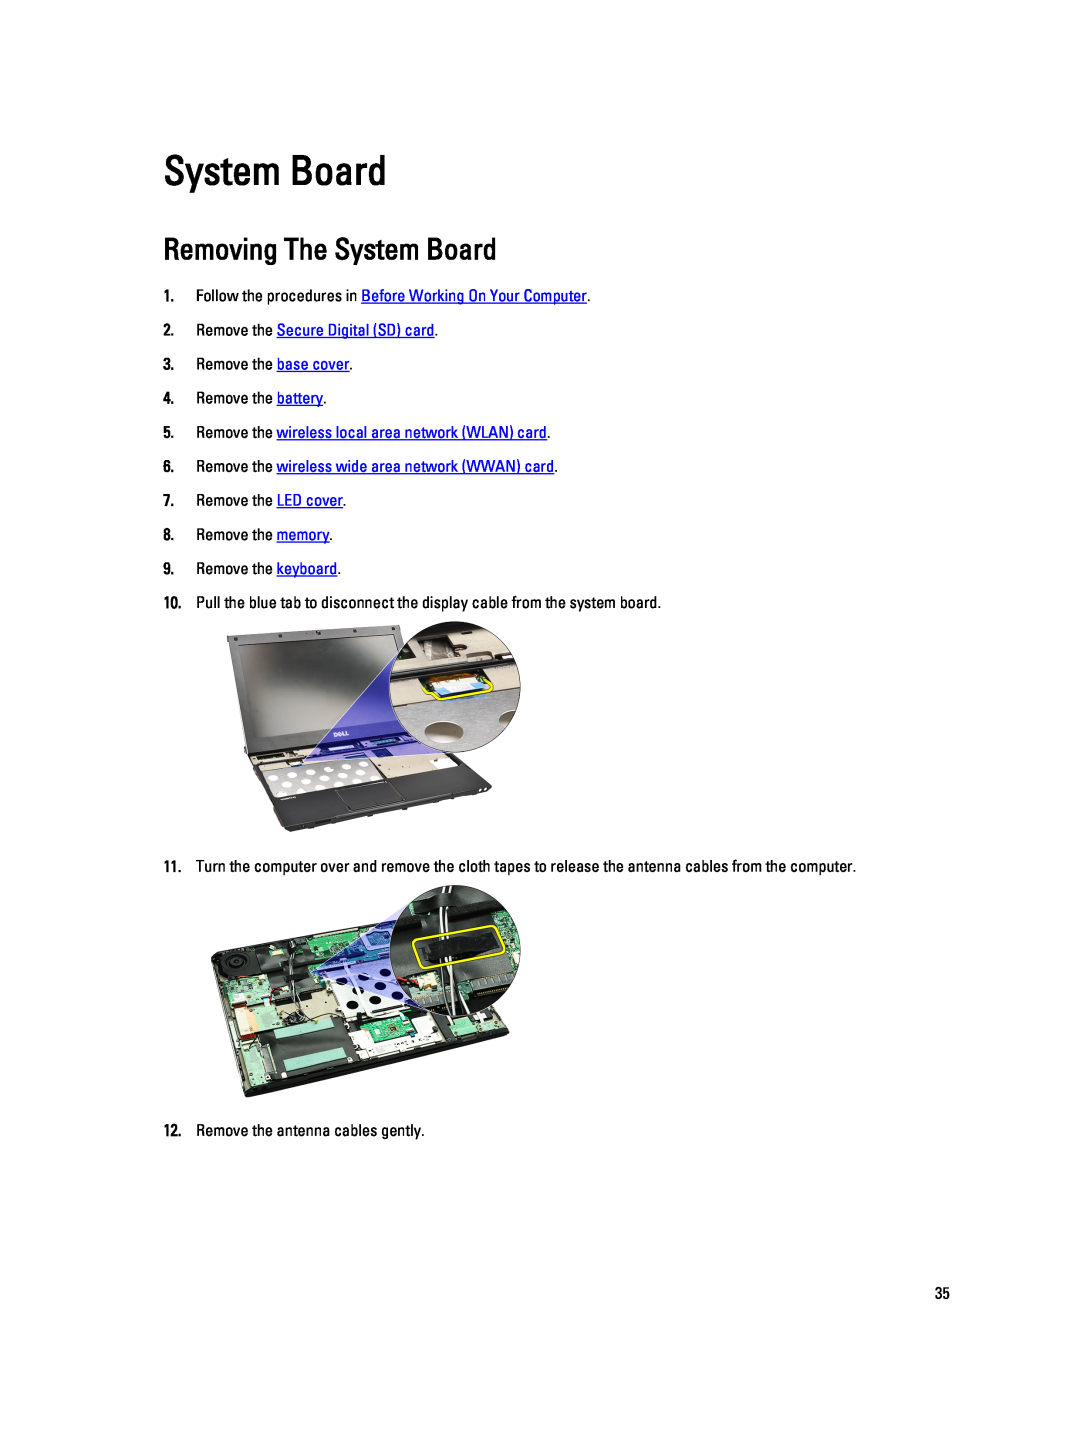 Dell V130 service manual Removing The System Board, Follow the procedures in Before Working On Your Computer 